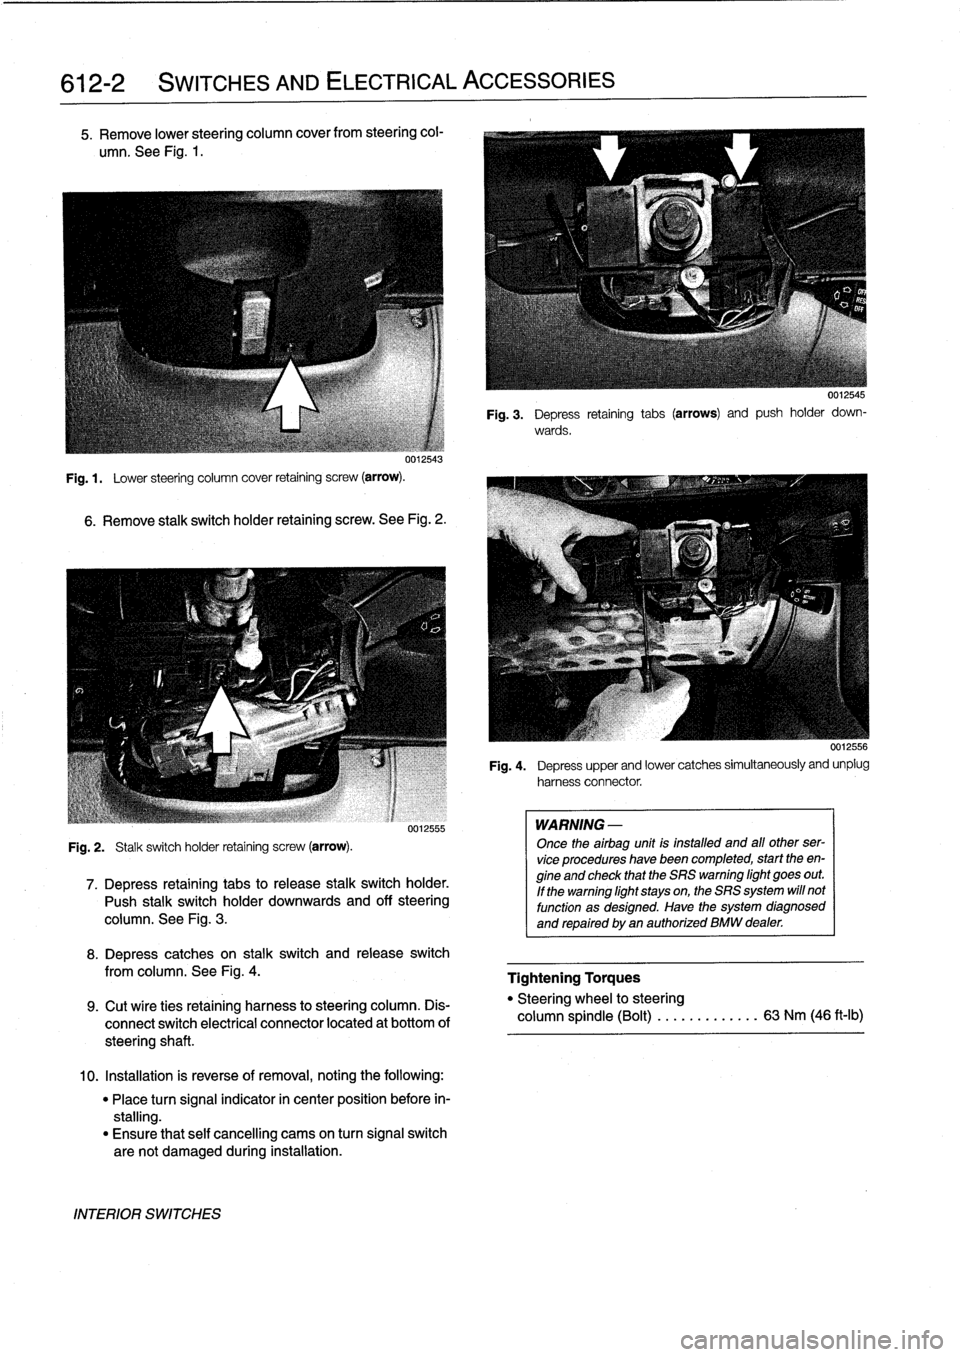 BMW 325i 1994 E36 Service Manual 
612-2

	

SWITCHES
AND
ELECTRICAL
ACCESSORIES

5
.
Remove
lower
steering
column
cover
from
steering
col-

umn
.
See
Fig
.
1
.

uu12543

Fig
.
1
.

	

Lower
steering
column
cover
retaining
screw
(arro